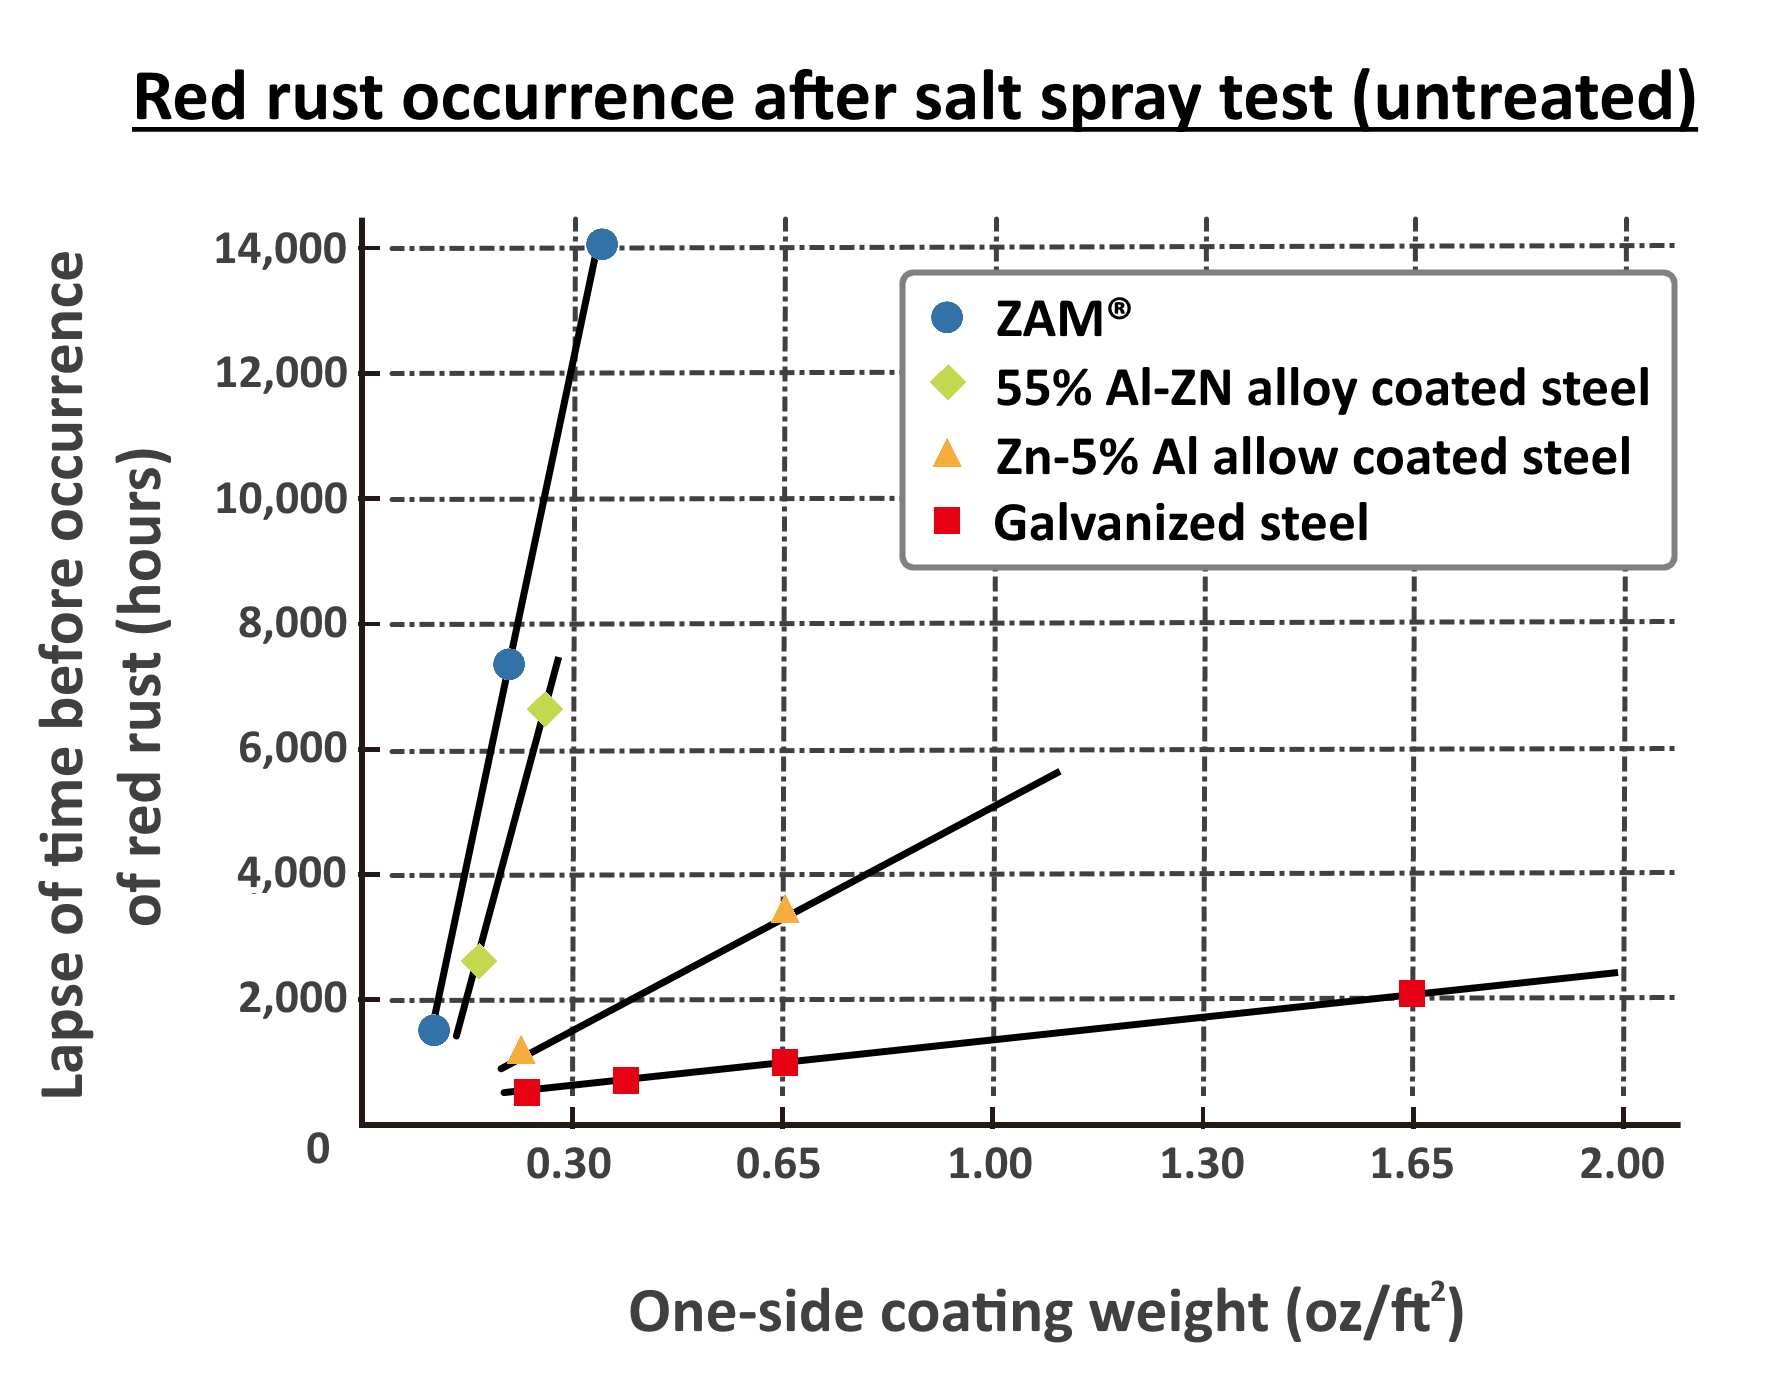 Graph showing corrosion resistance of ZAM after salt spray test compared to other coated metals